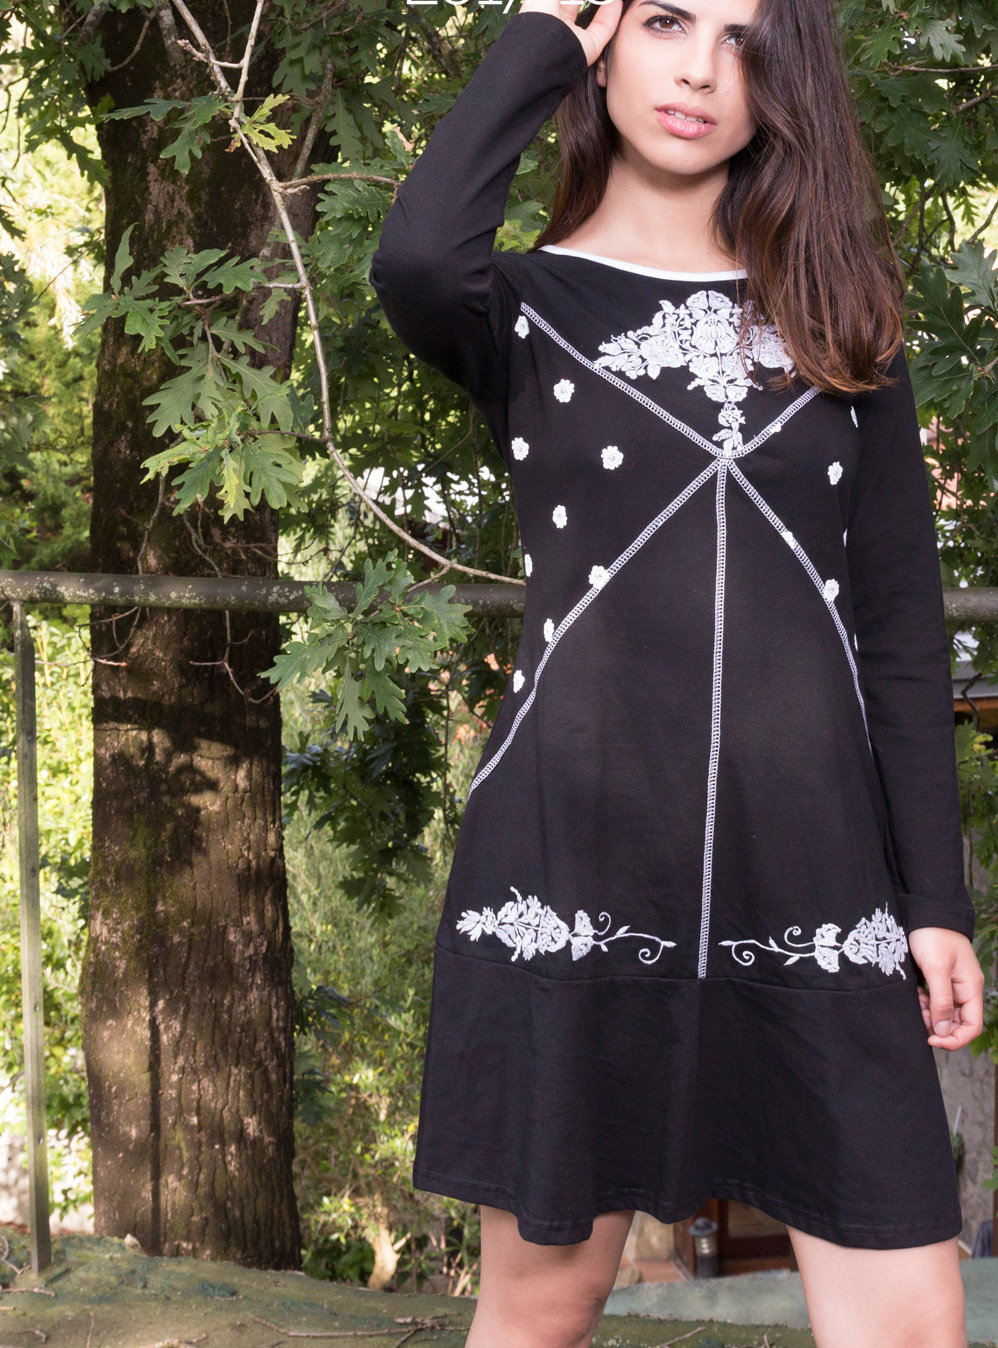 Savage Culture: Snow Daisy Embroidered Dress/Tunic Odile SOLD OUT